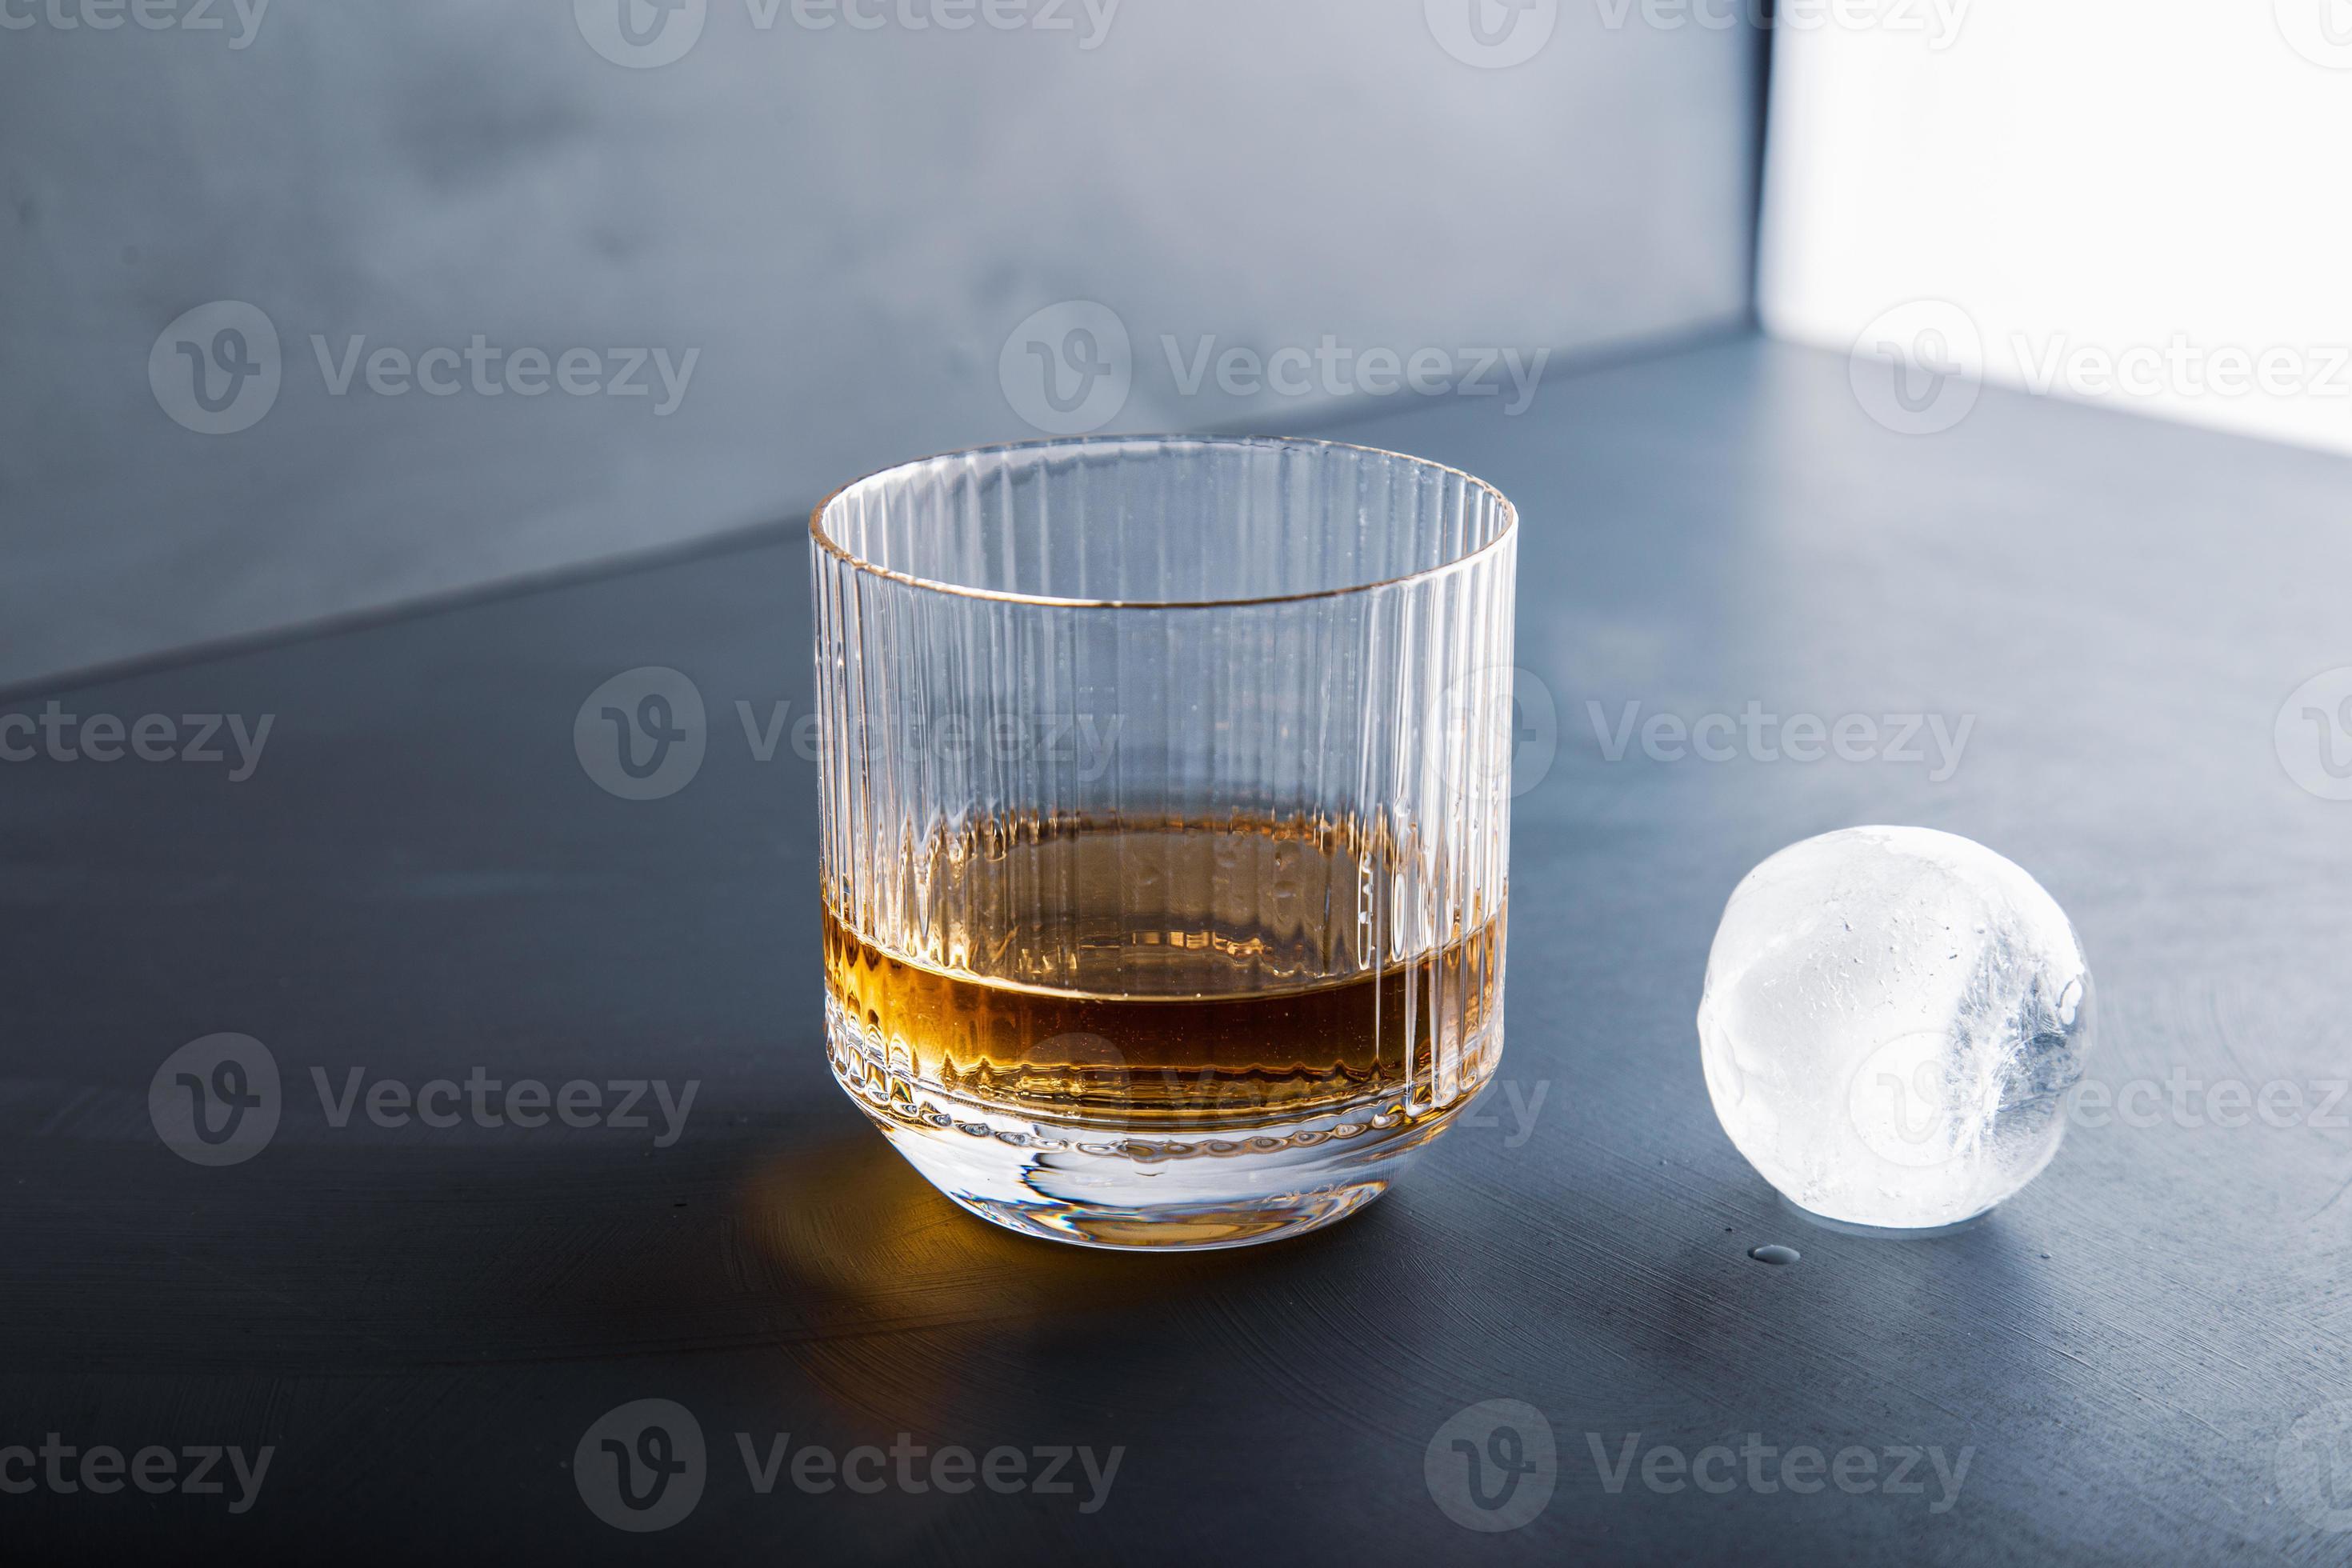 https://static.vecteezy.com/system/resources/previews/006/602/878/large_2x/sphere-shaped-ice-cube-and-close-up-whiskey-view-from-studio-photo.jpg